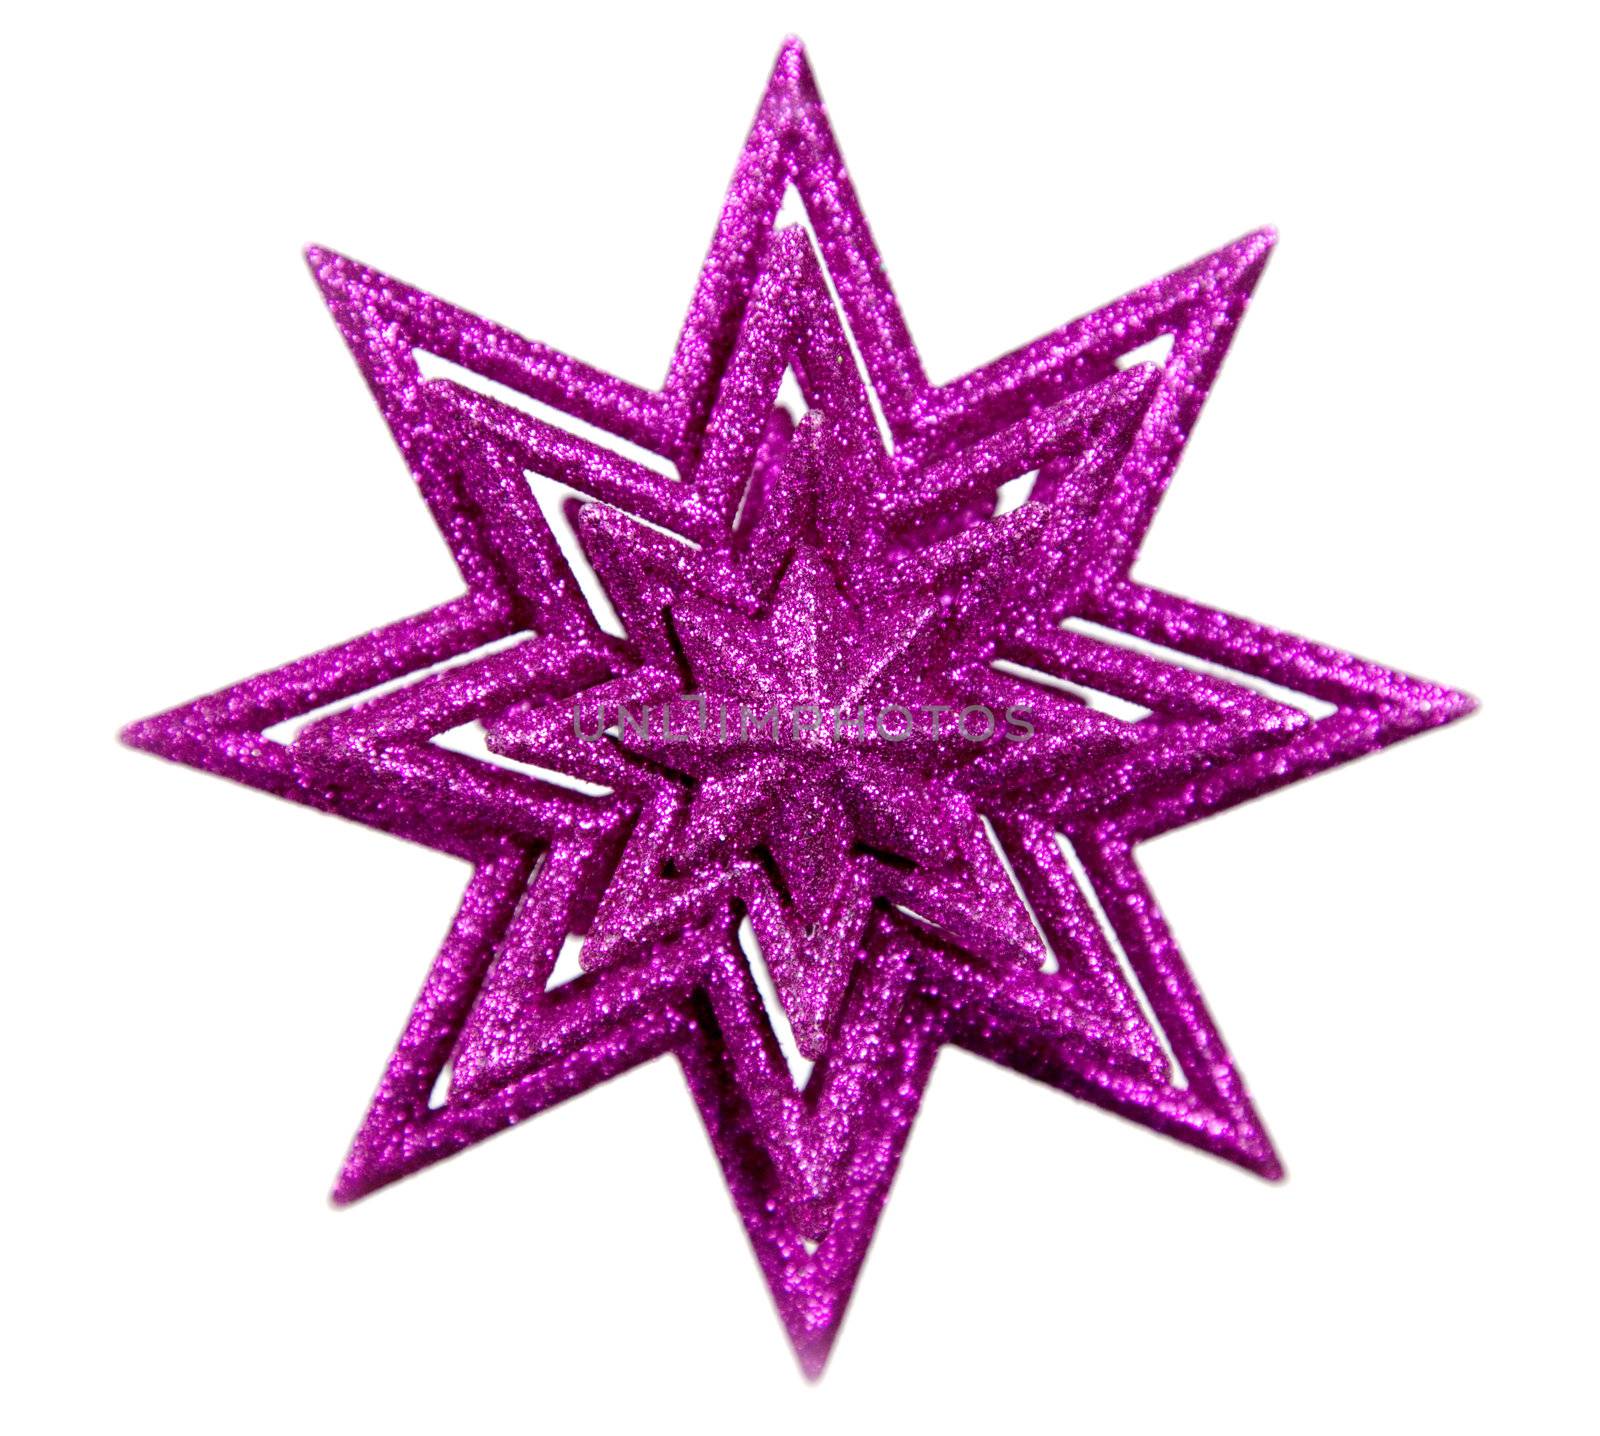 Isolated purple star on white